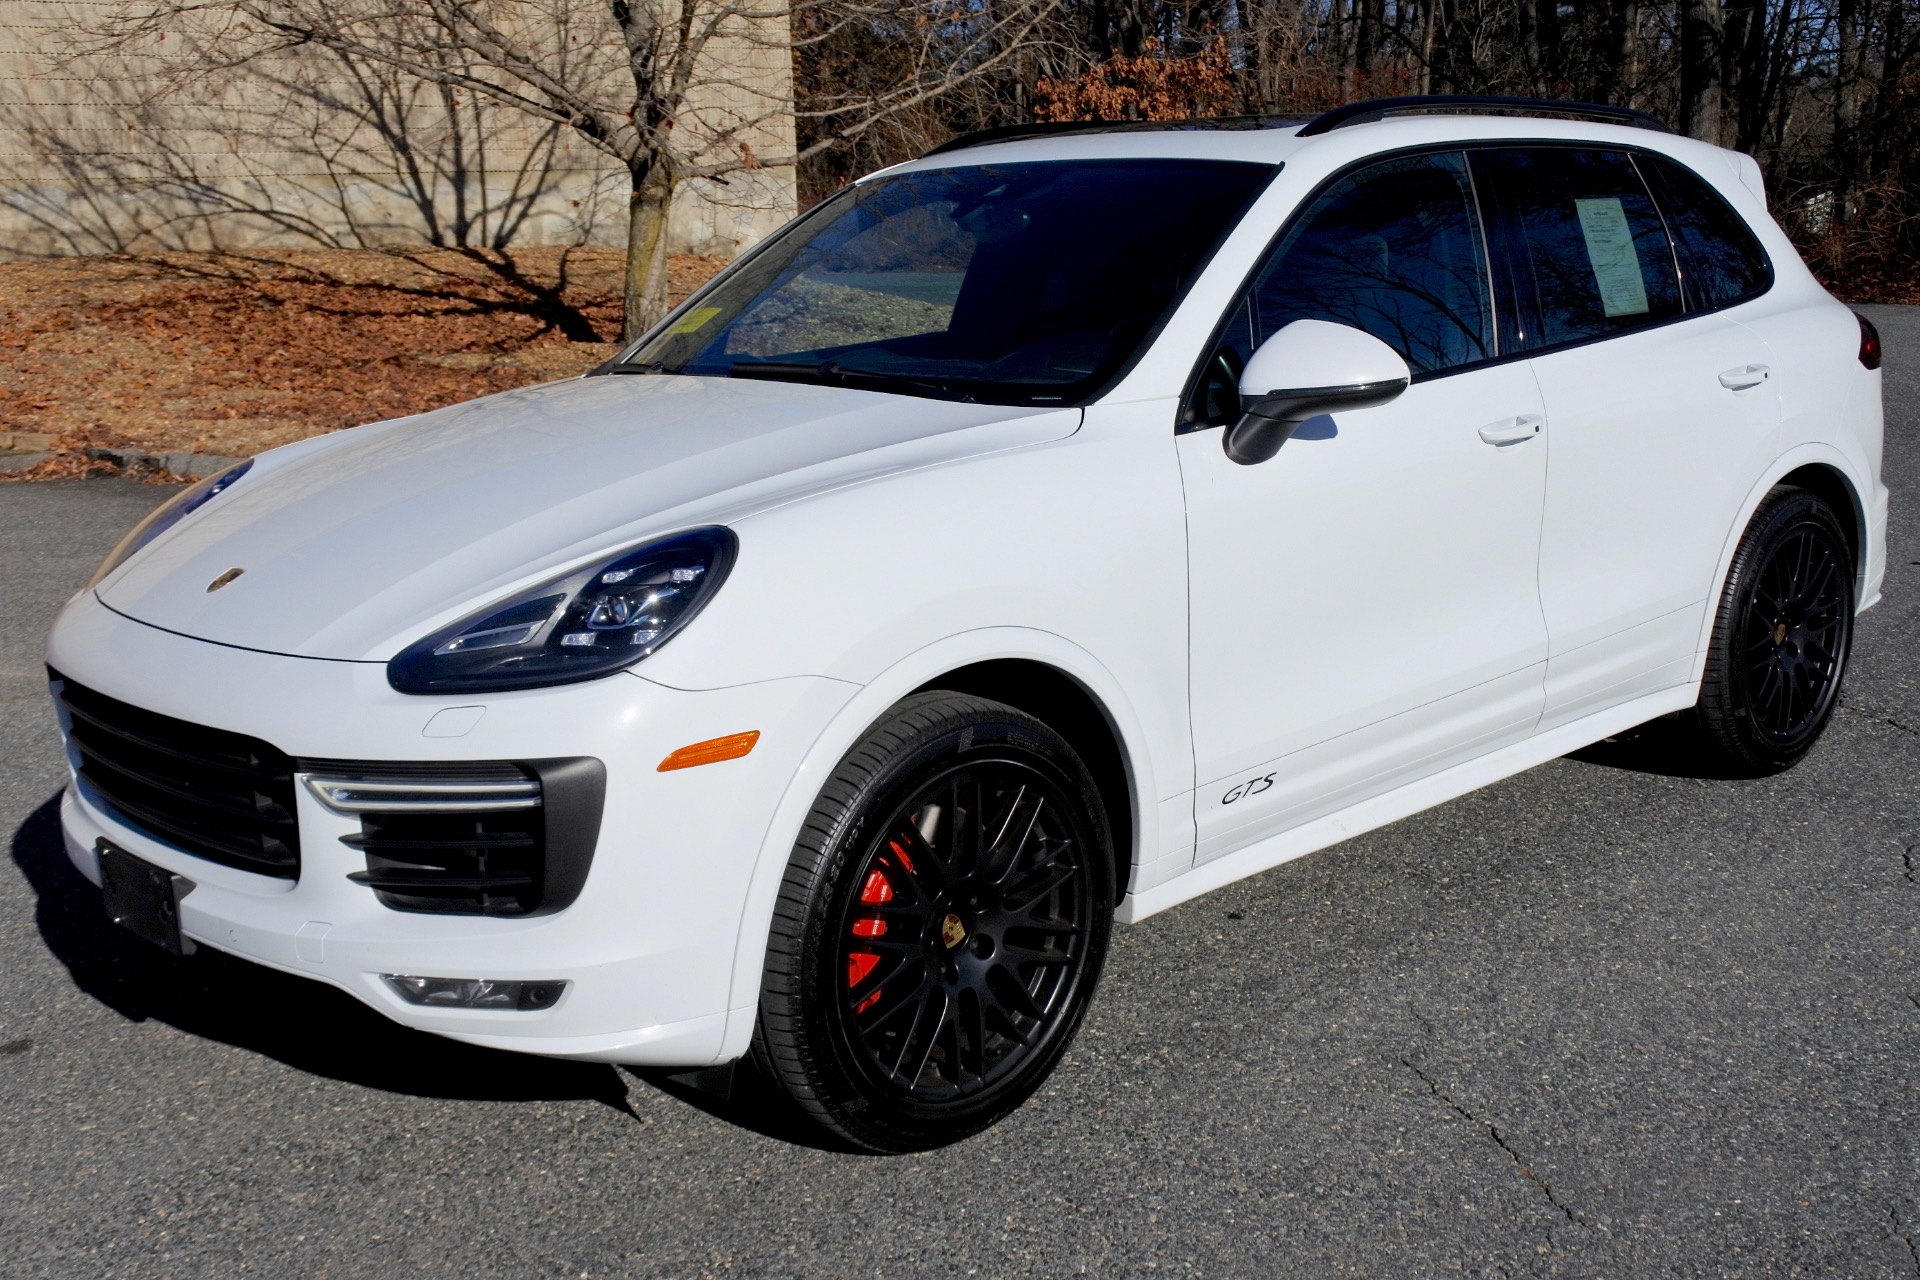 Used 16 Porsche Cayenne Gts For Sale 48 800 Metro West Motorcars Llc Stock 0818